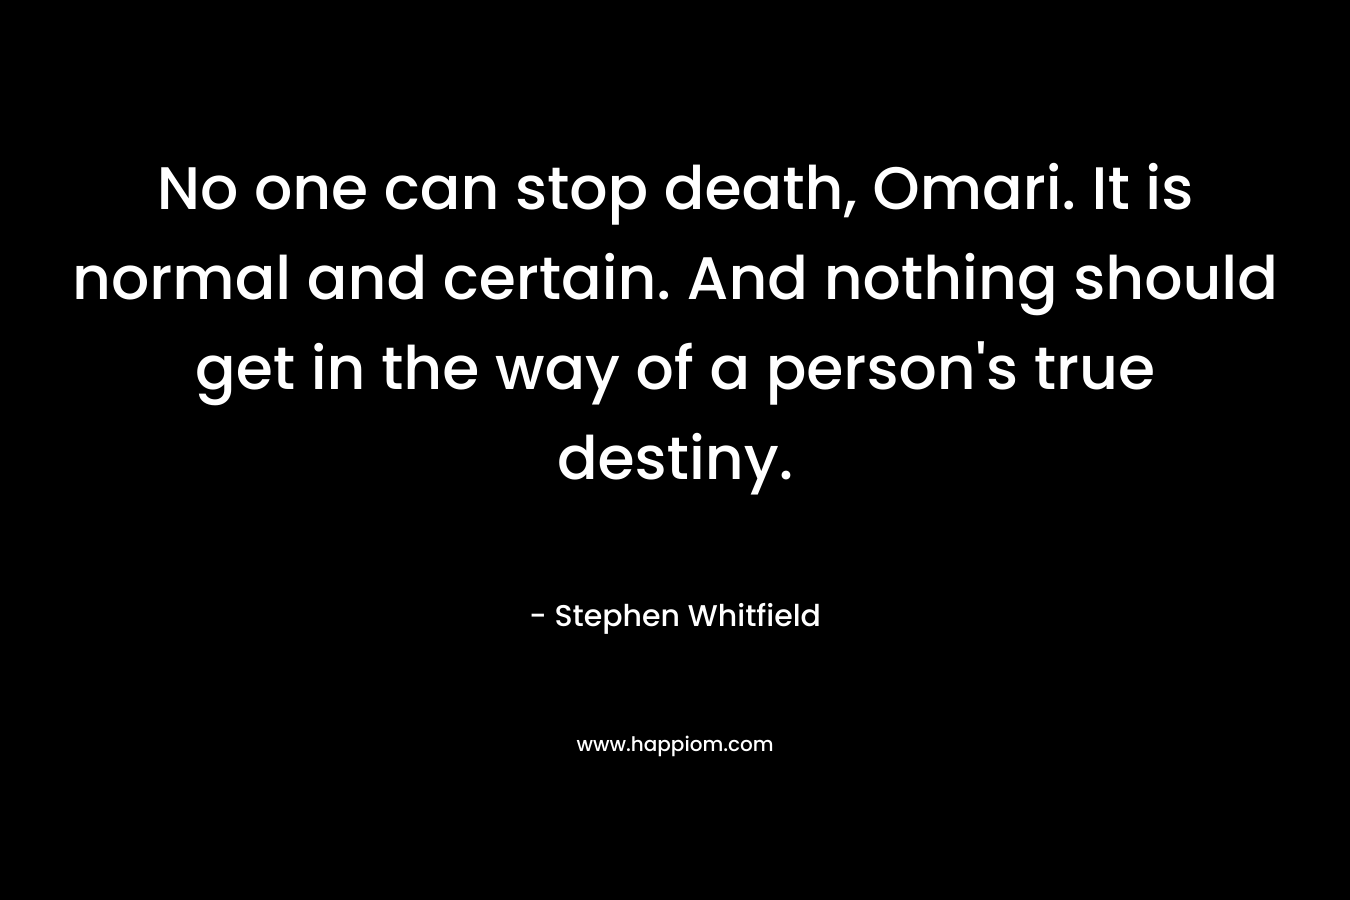 No one can stop death, Omari. It is normal and certain. And nothing should get in the way of a person's true destiny.